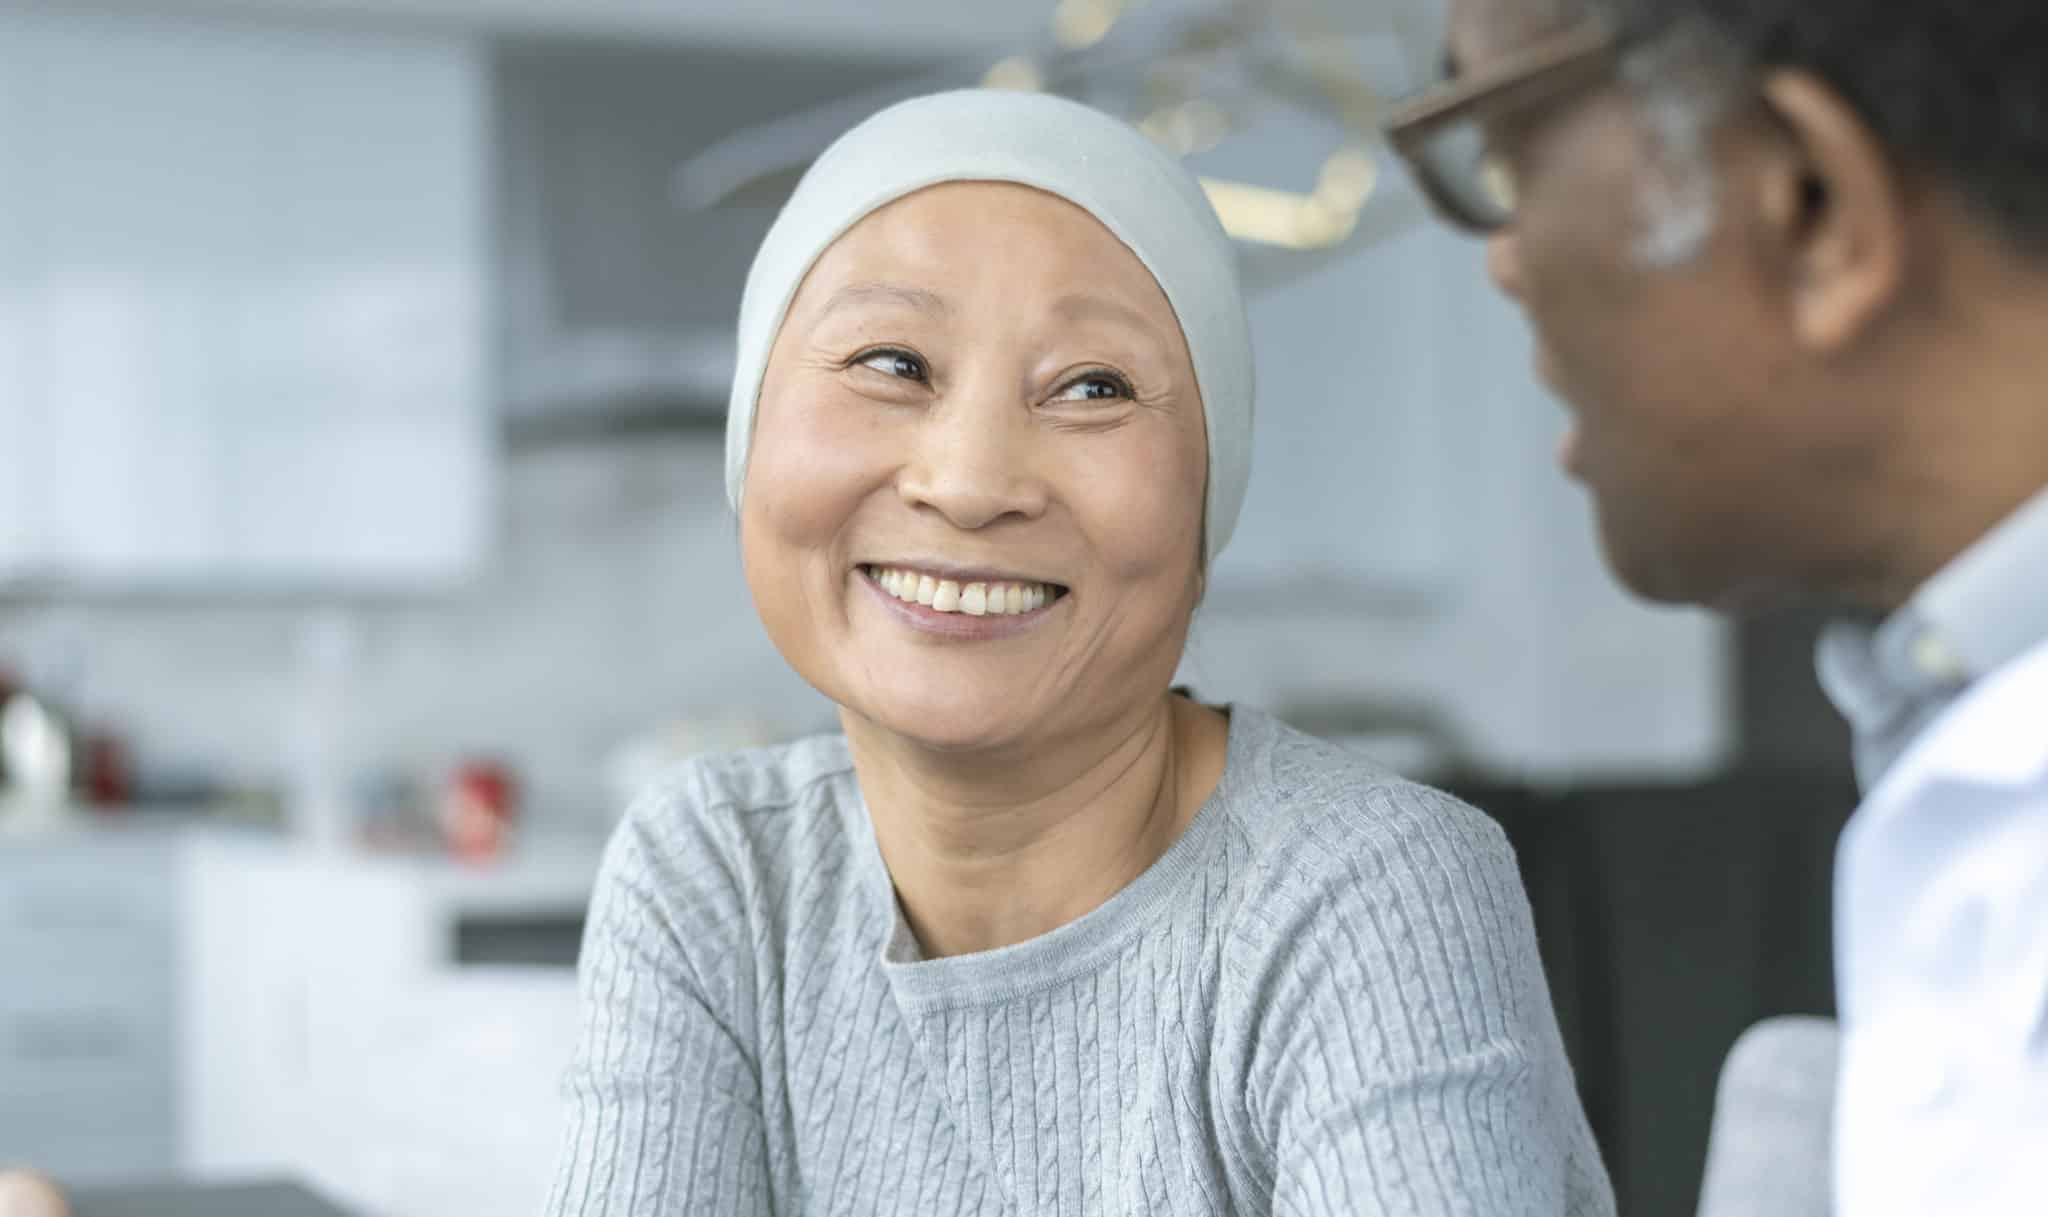 An outpatient chemo patient speaks with a doctor